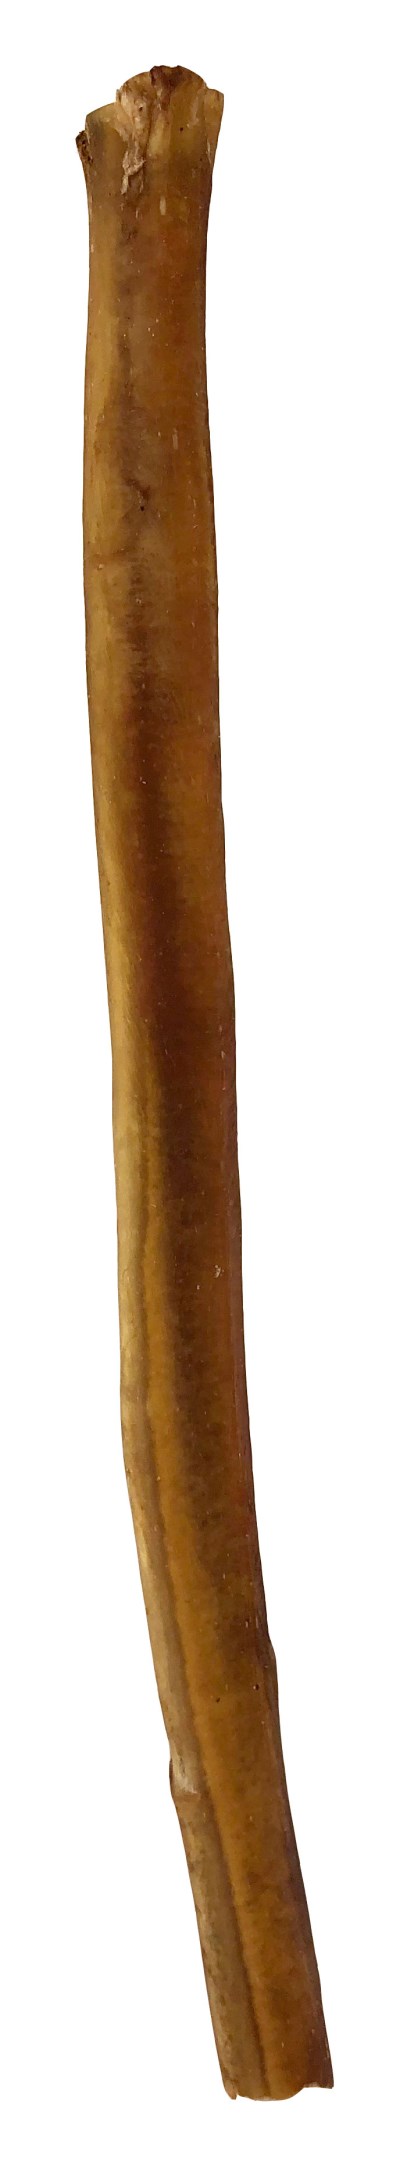 Hollywood Feed Made In South America Dog Chew - Bully Stick - 12 in-each